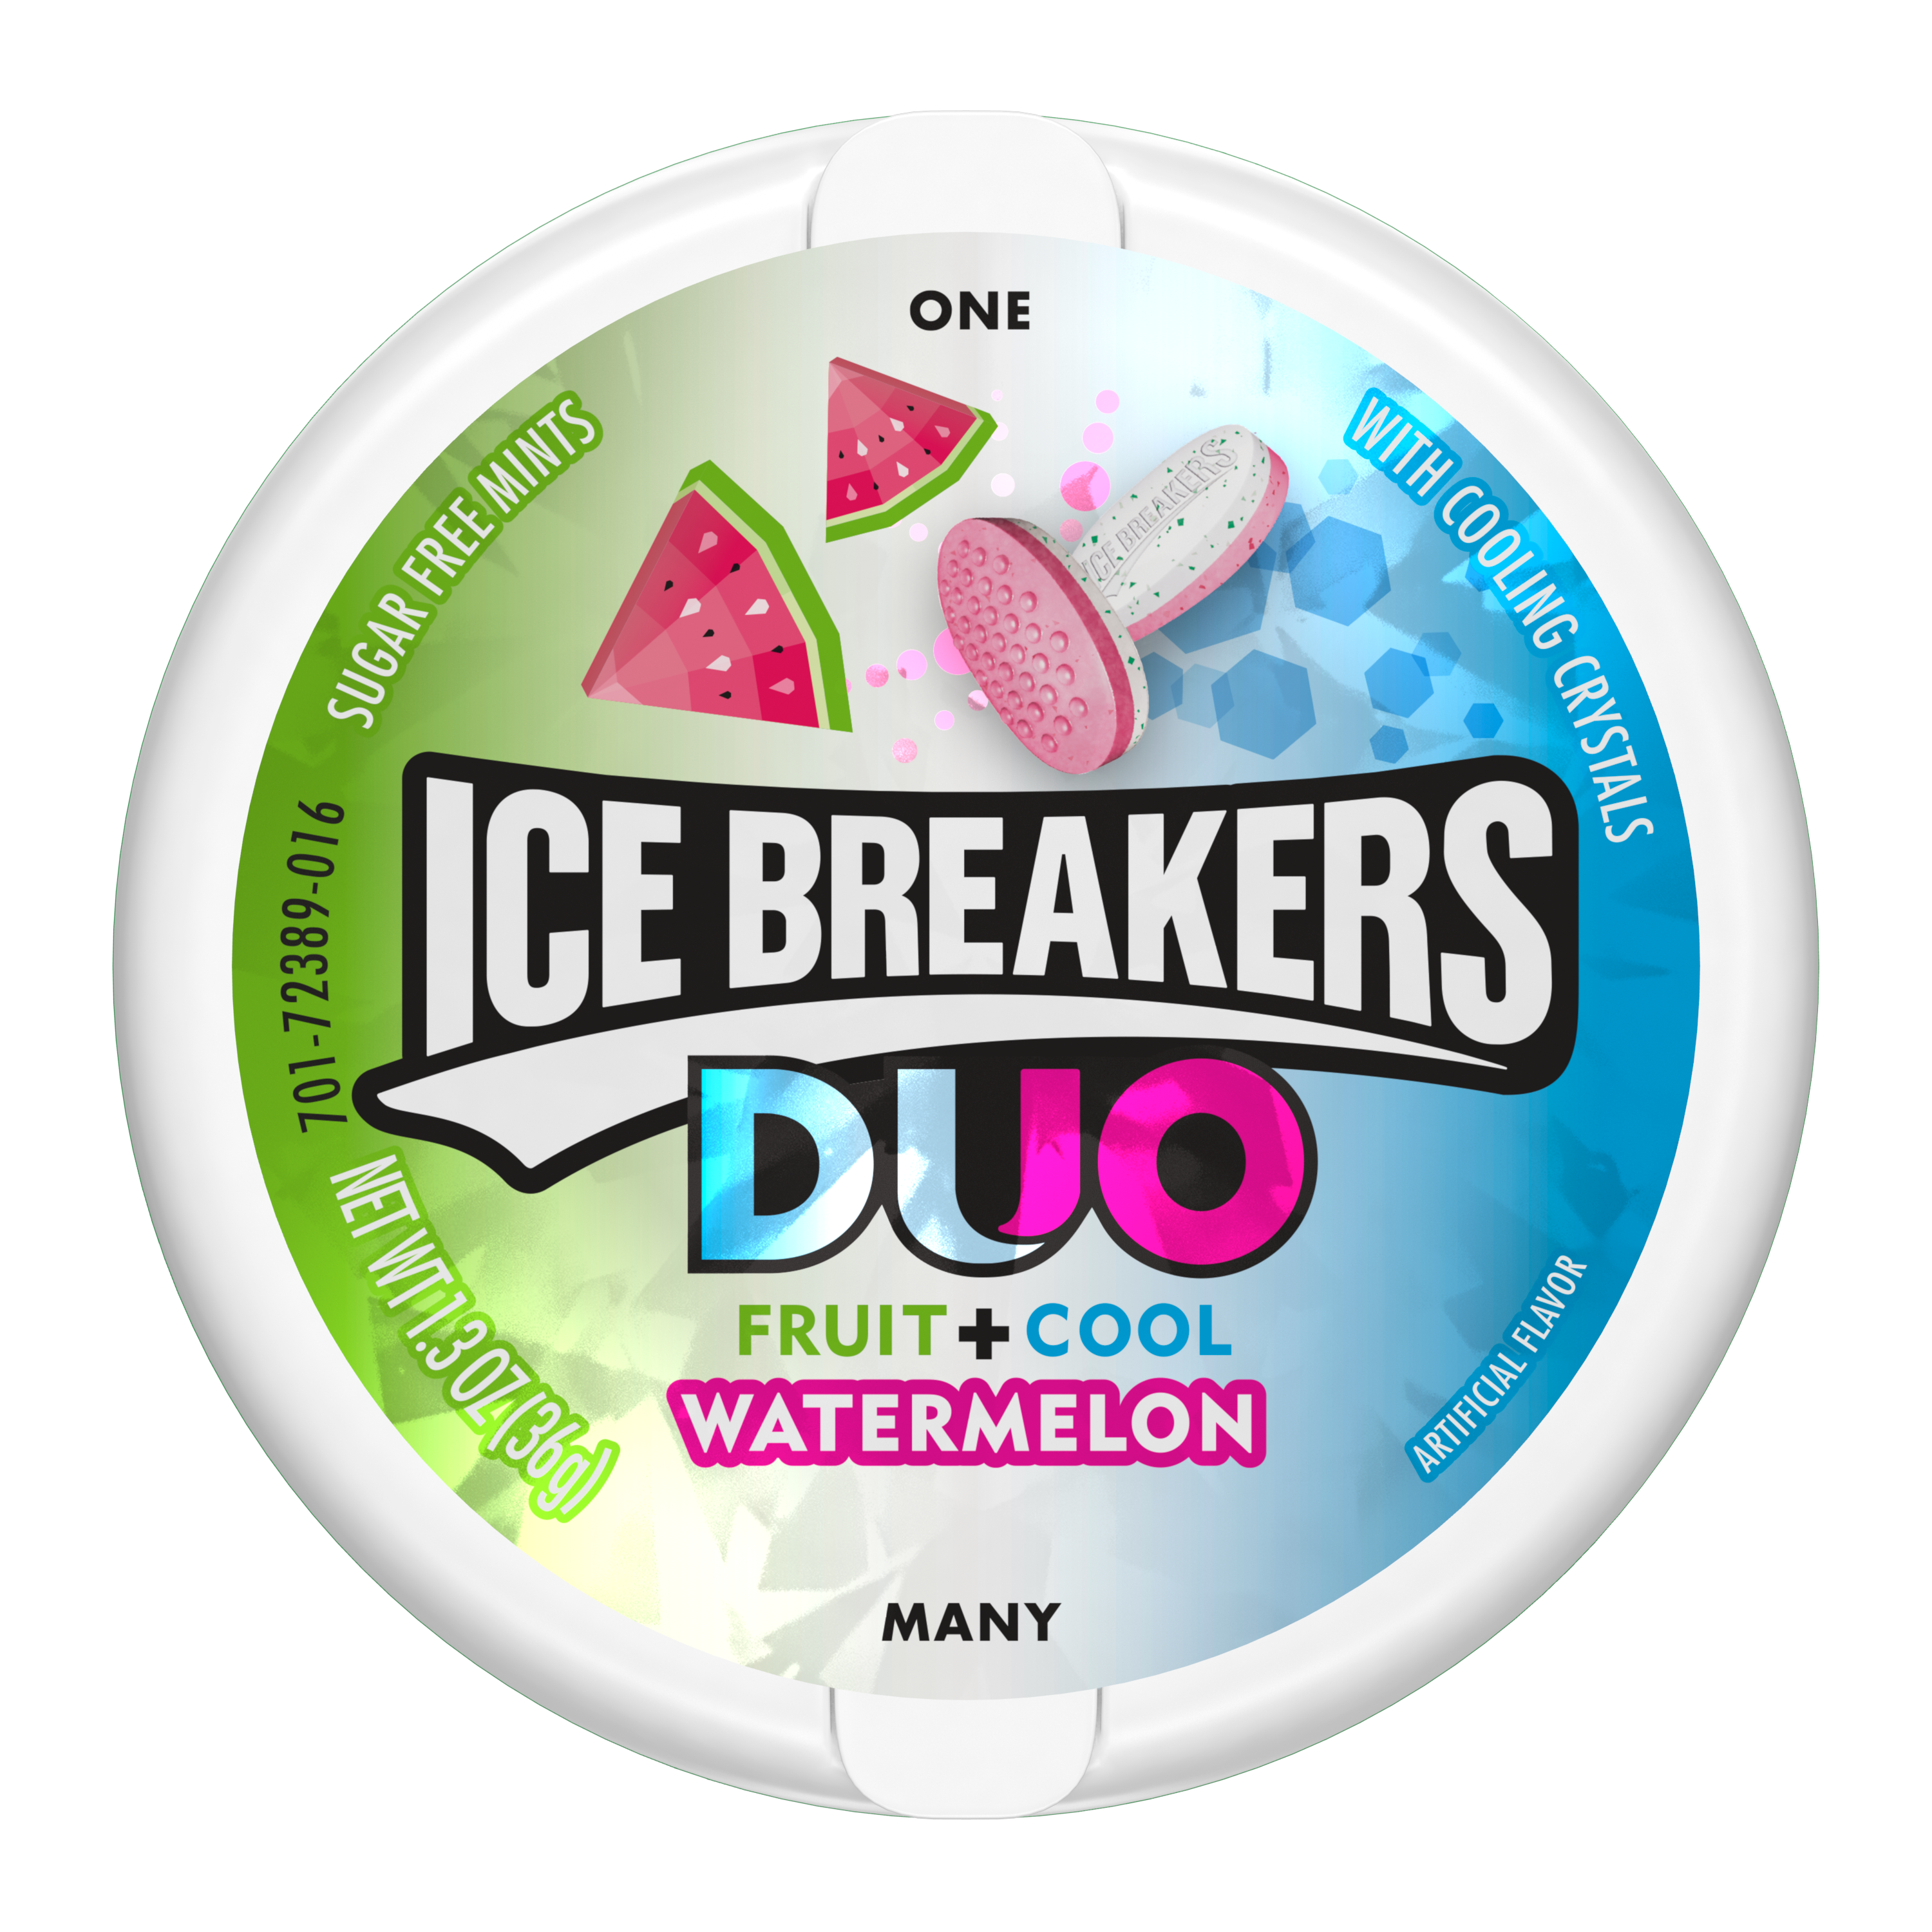 ICE BREAKERS DUO Watermelon Sugar Free Mints, 1.3 oz puck - Front of Package